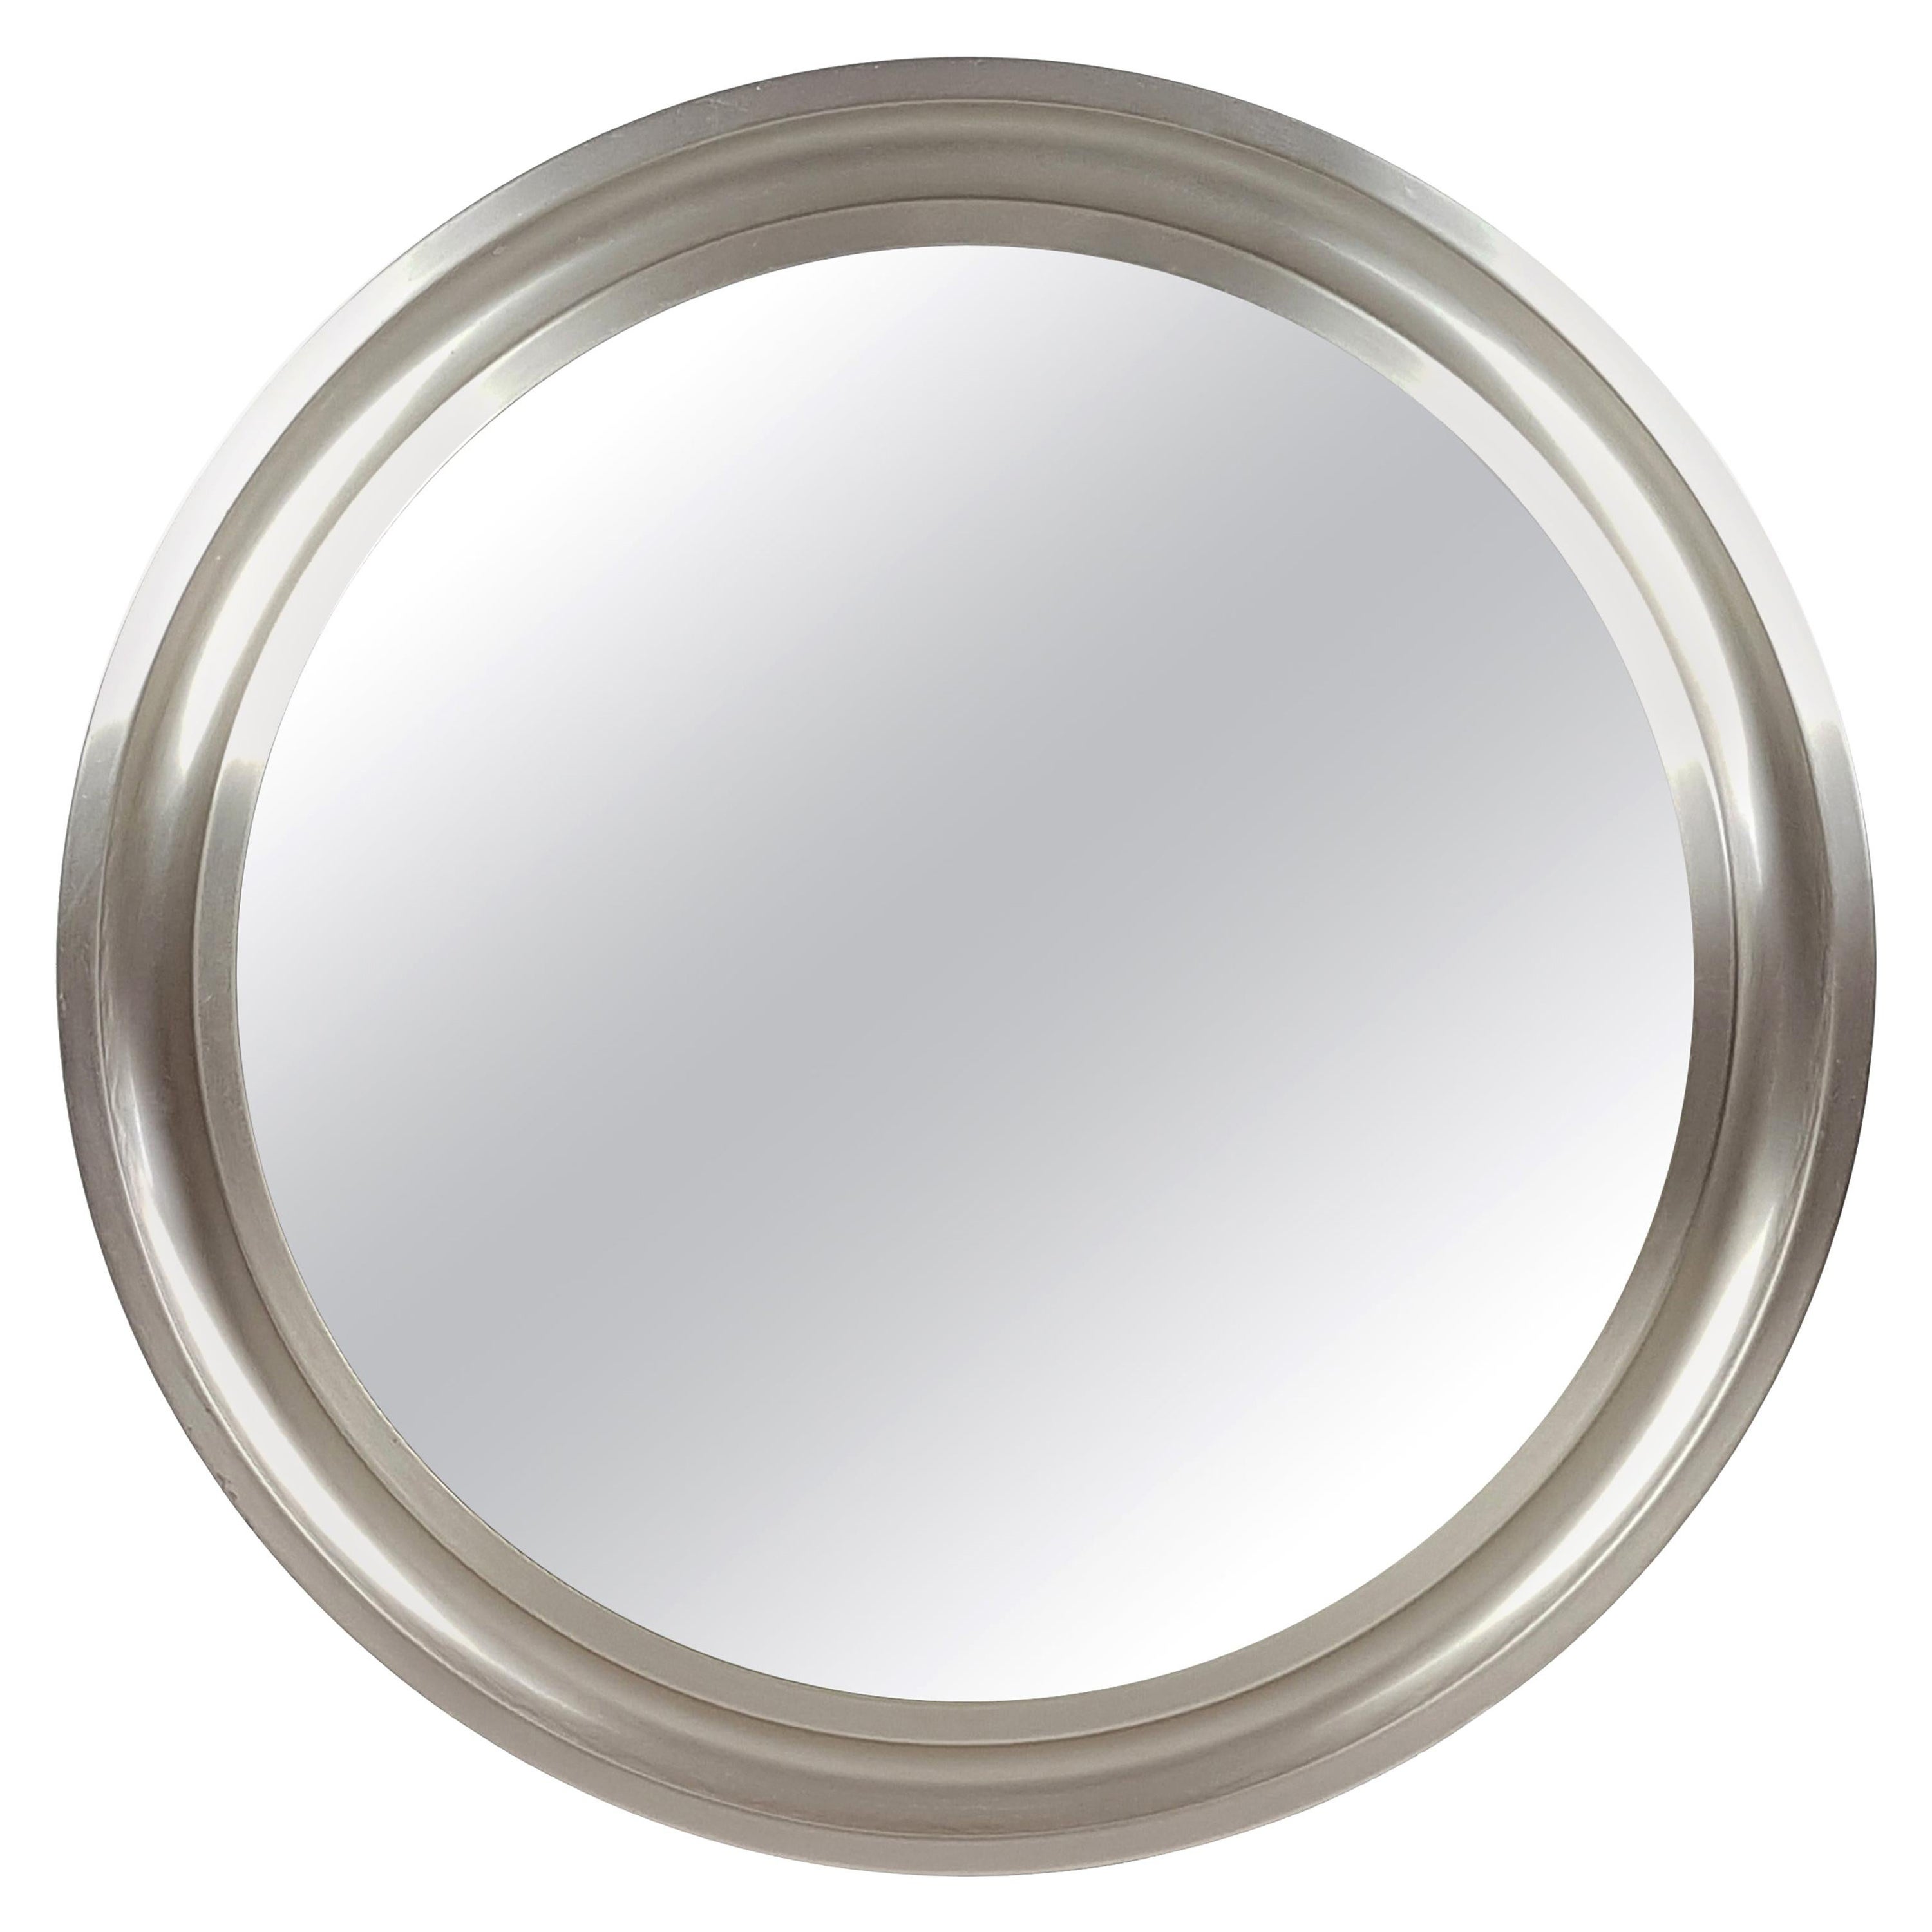 Nickeled & Black Metal 1970s Round Wall Mirror Narcisso by S. Mazza for Artemide